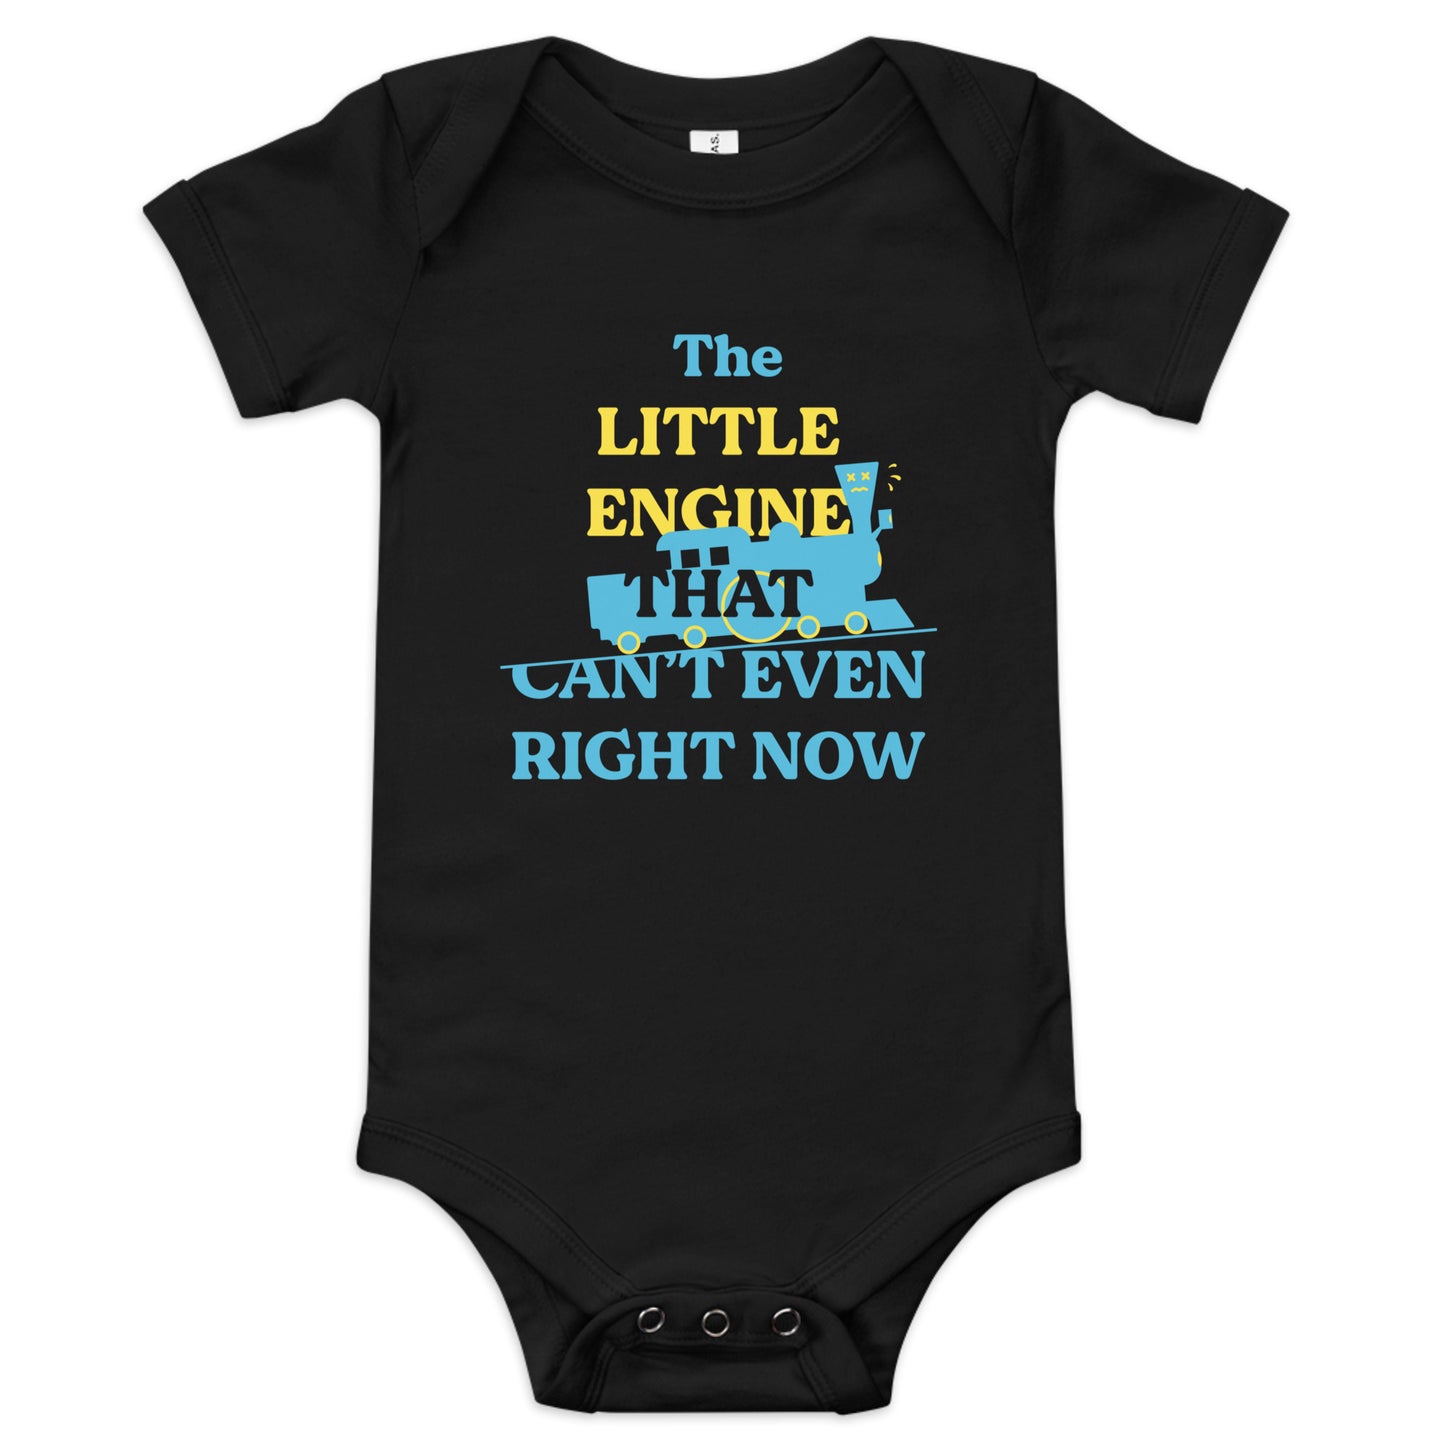 The Little Engine That Can't Even Right Now Kid's Onesie